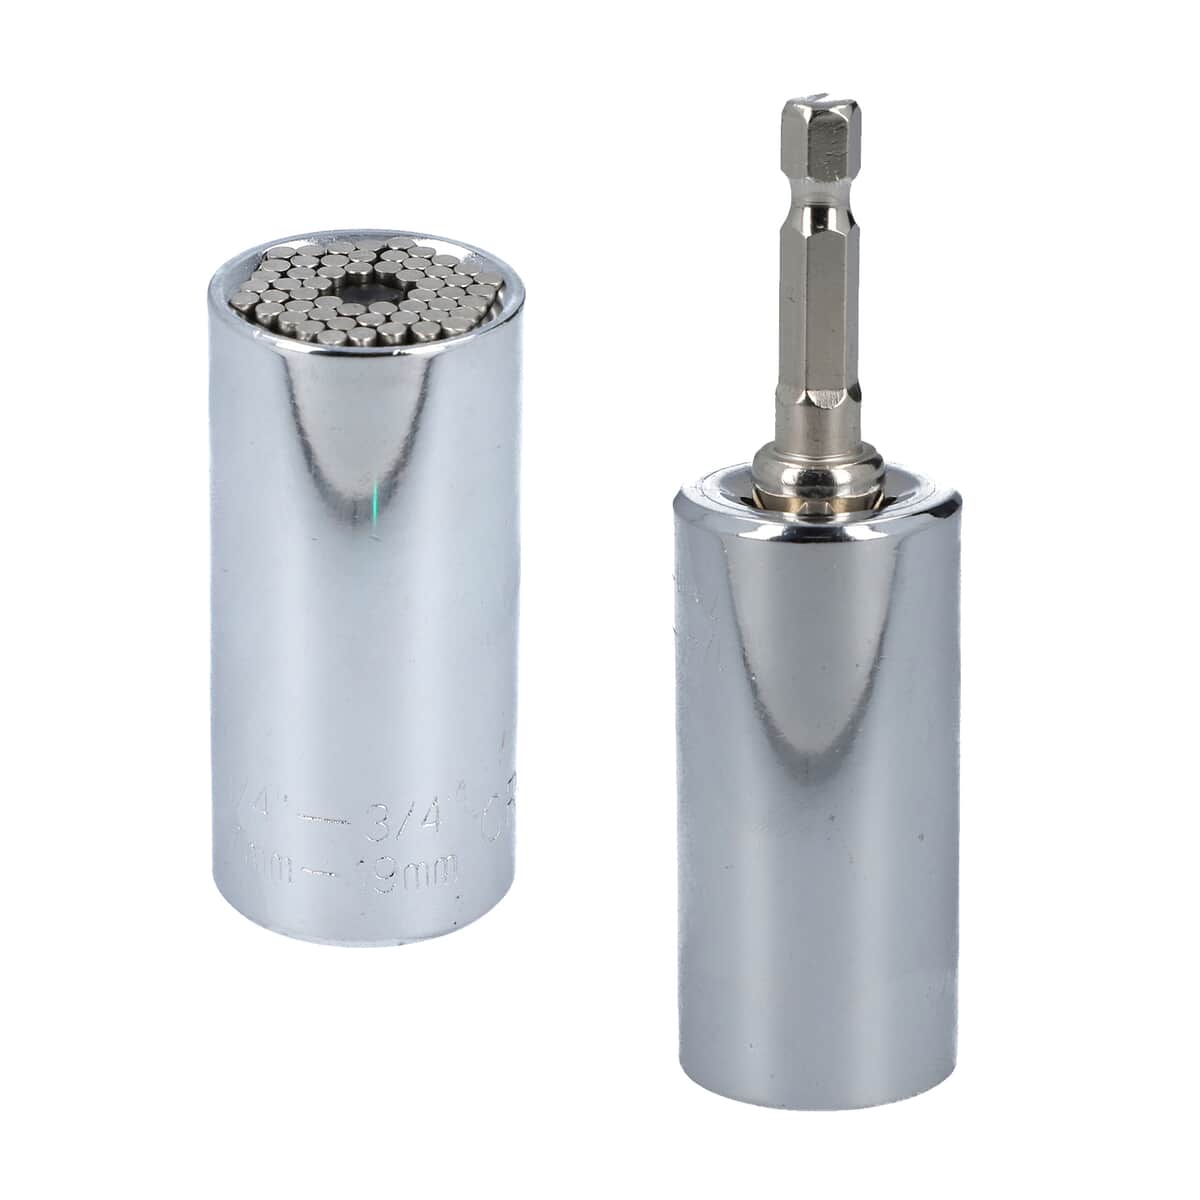 Set of 2 Universal Socket (2.05"x0.98") with Drill Adapter (1.97"x0.39"x0.25") in Stainless Steel - Silver Color image number 5